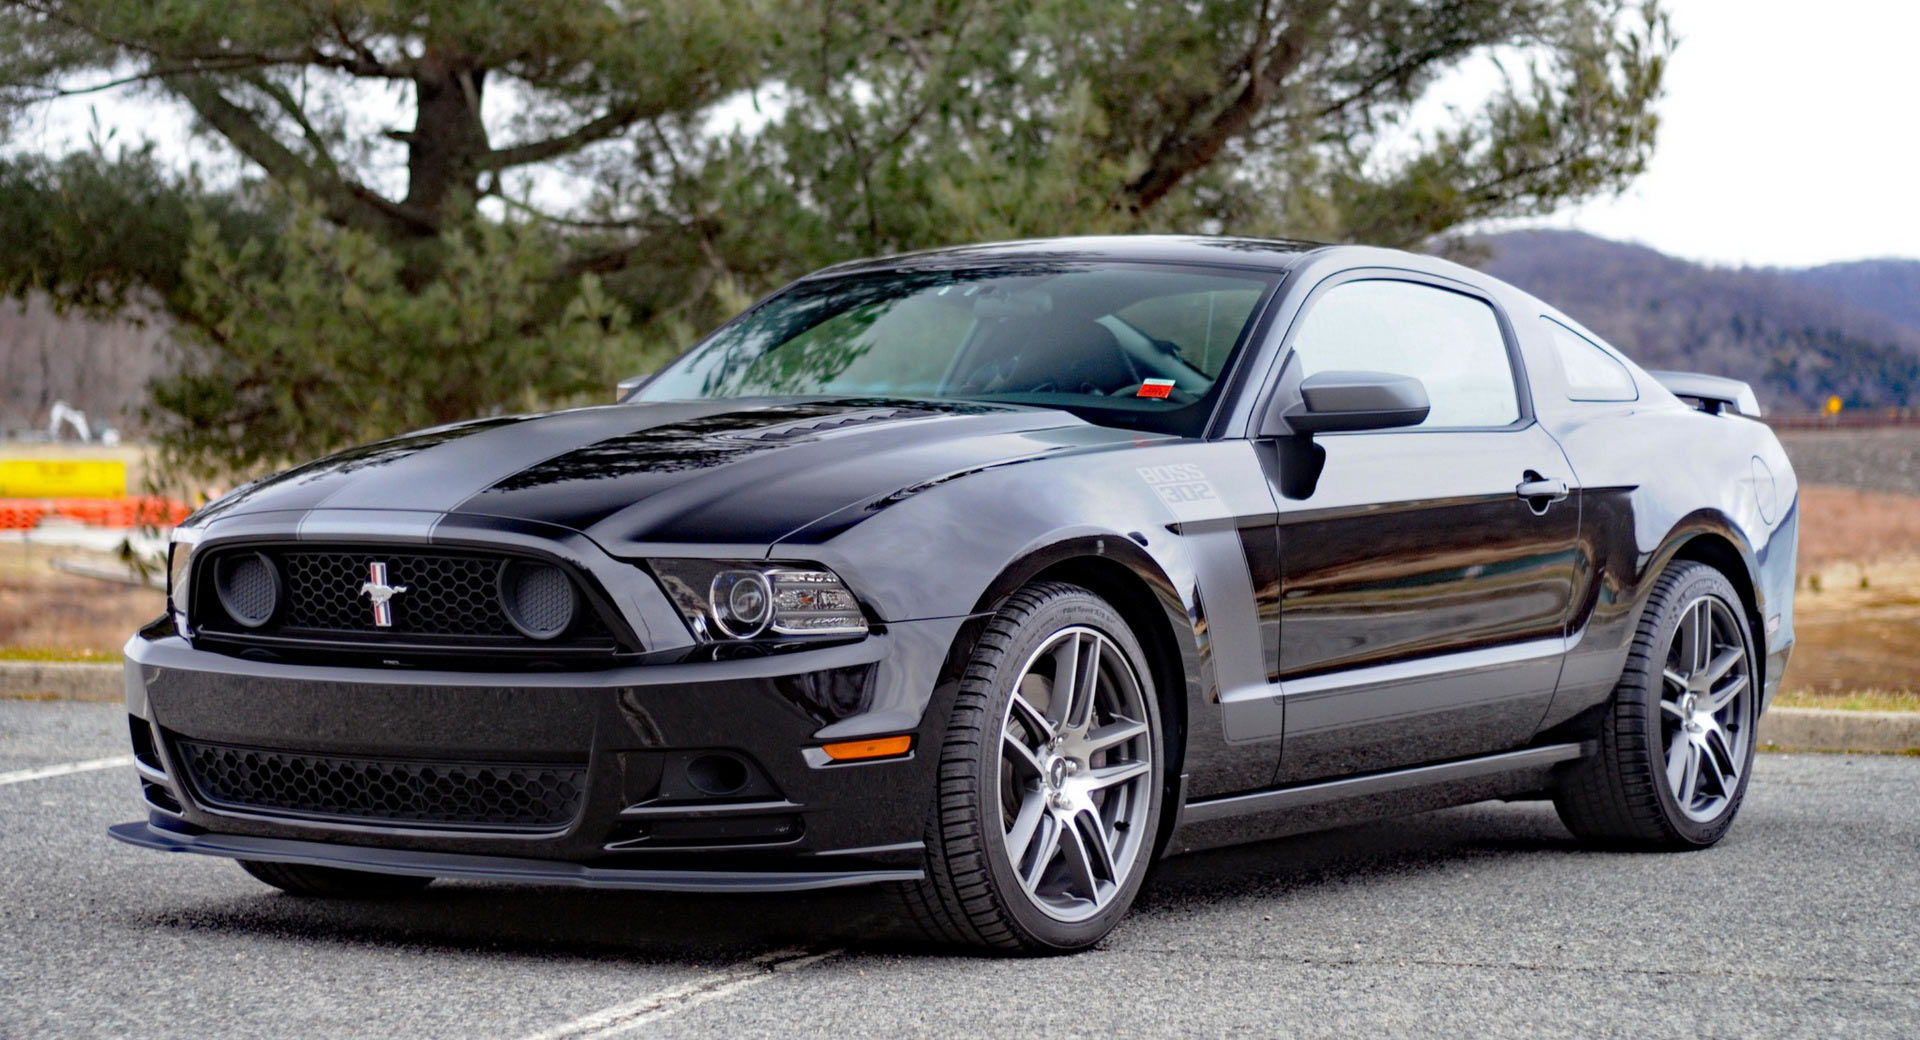 This Edition 2013 Ford Mustang 302 Laguna Seca Just 3.7k On It | Carscoops